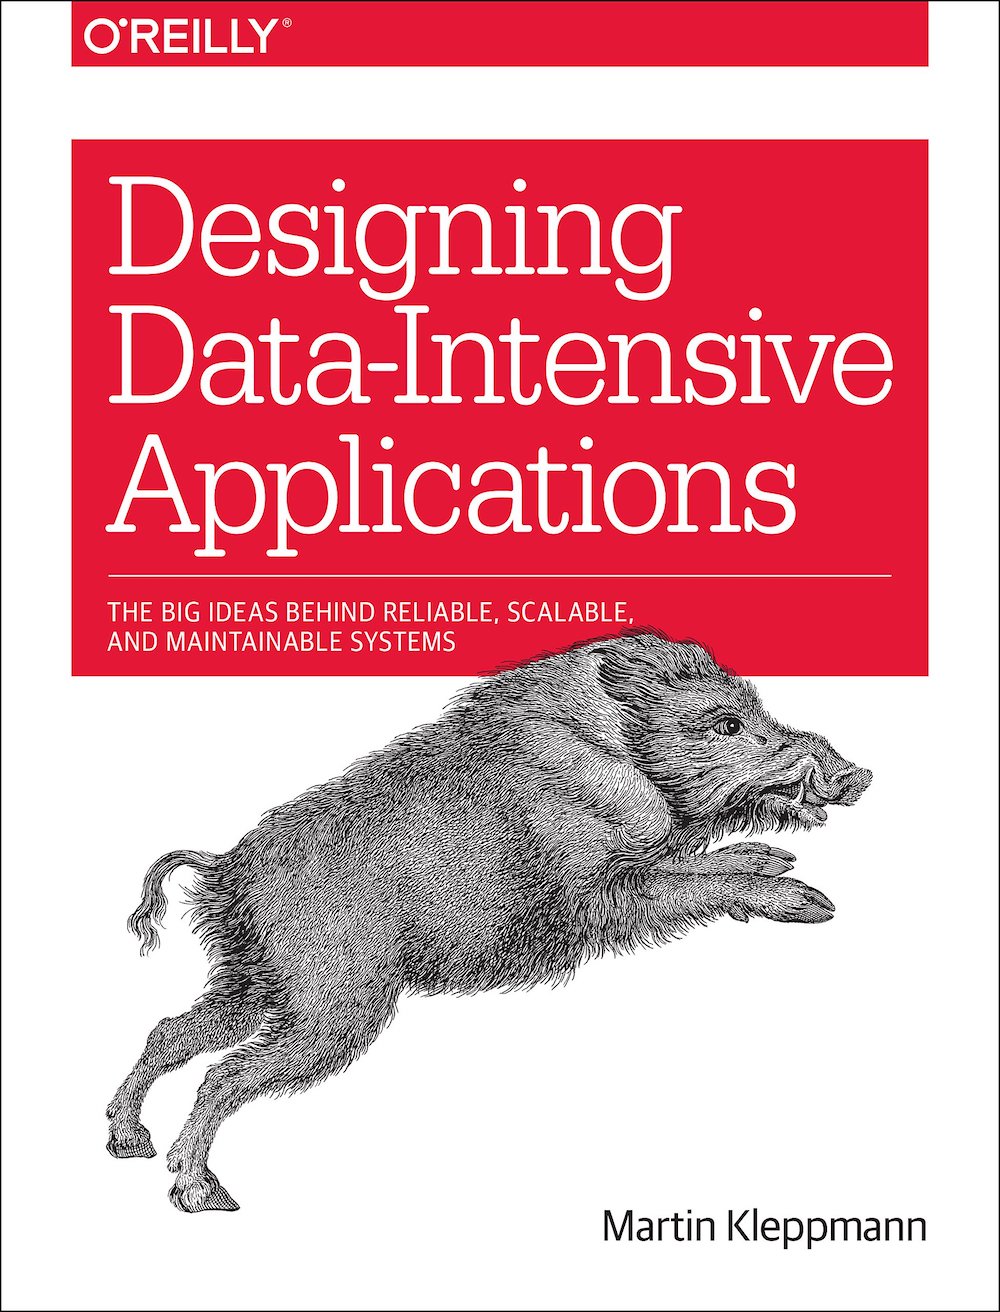 Designing Data-Intensive Applications - Chapter 4 - Encoding and Evolution